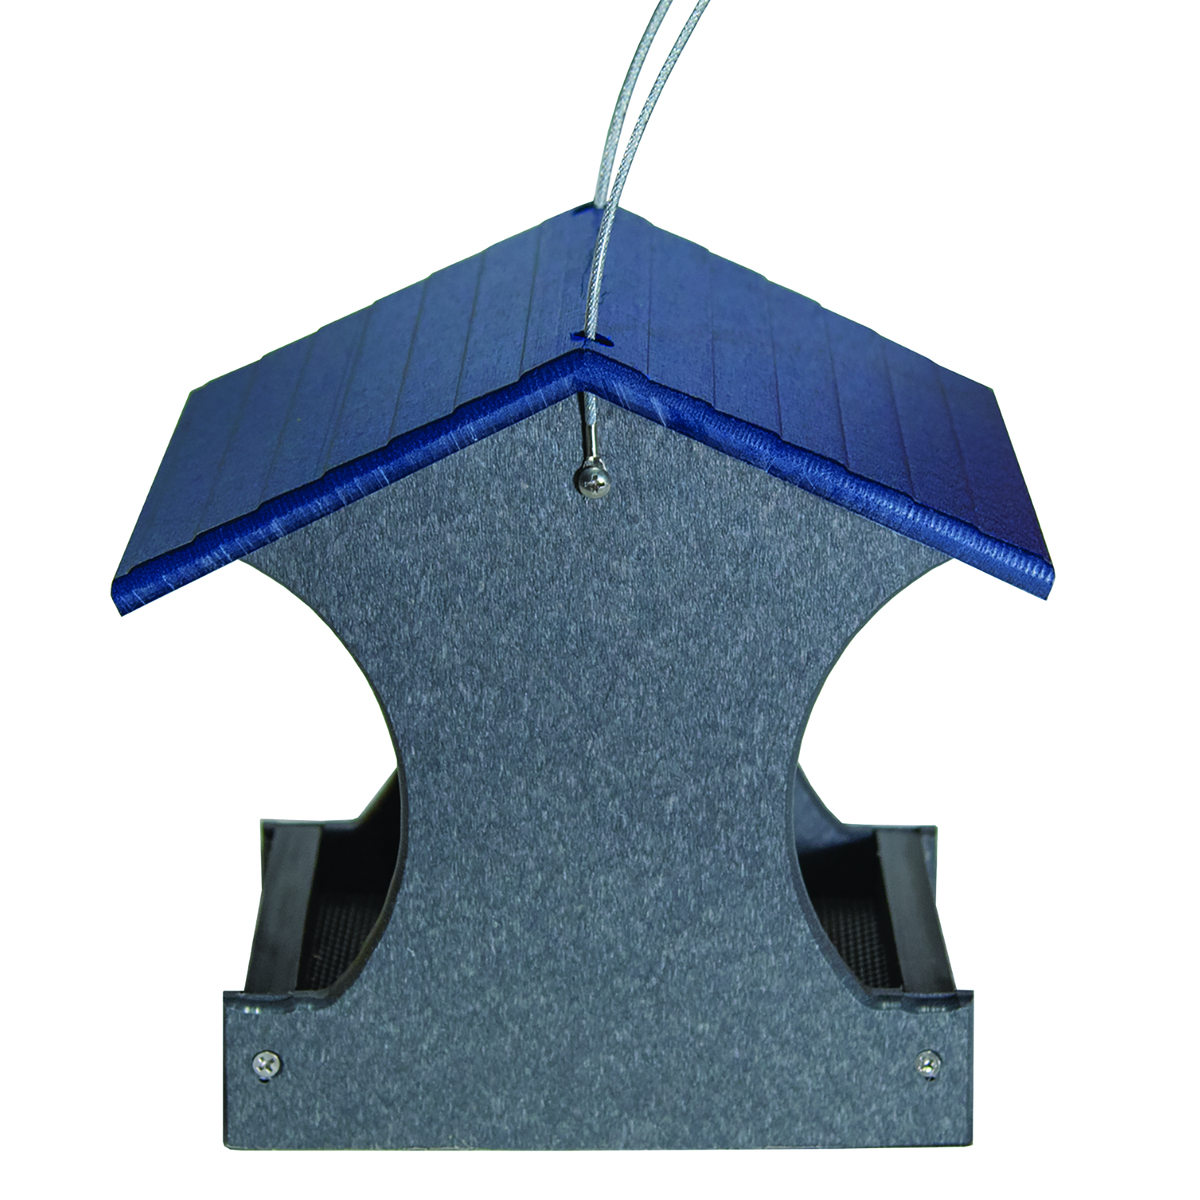 Picture of Americas Favorite 556104 7.56 x 9.96 x 8.04 in. MP60 HF Blue & Gray Small Hopper Brid Feeder